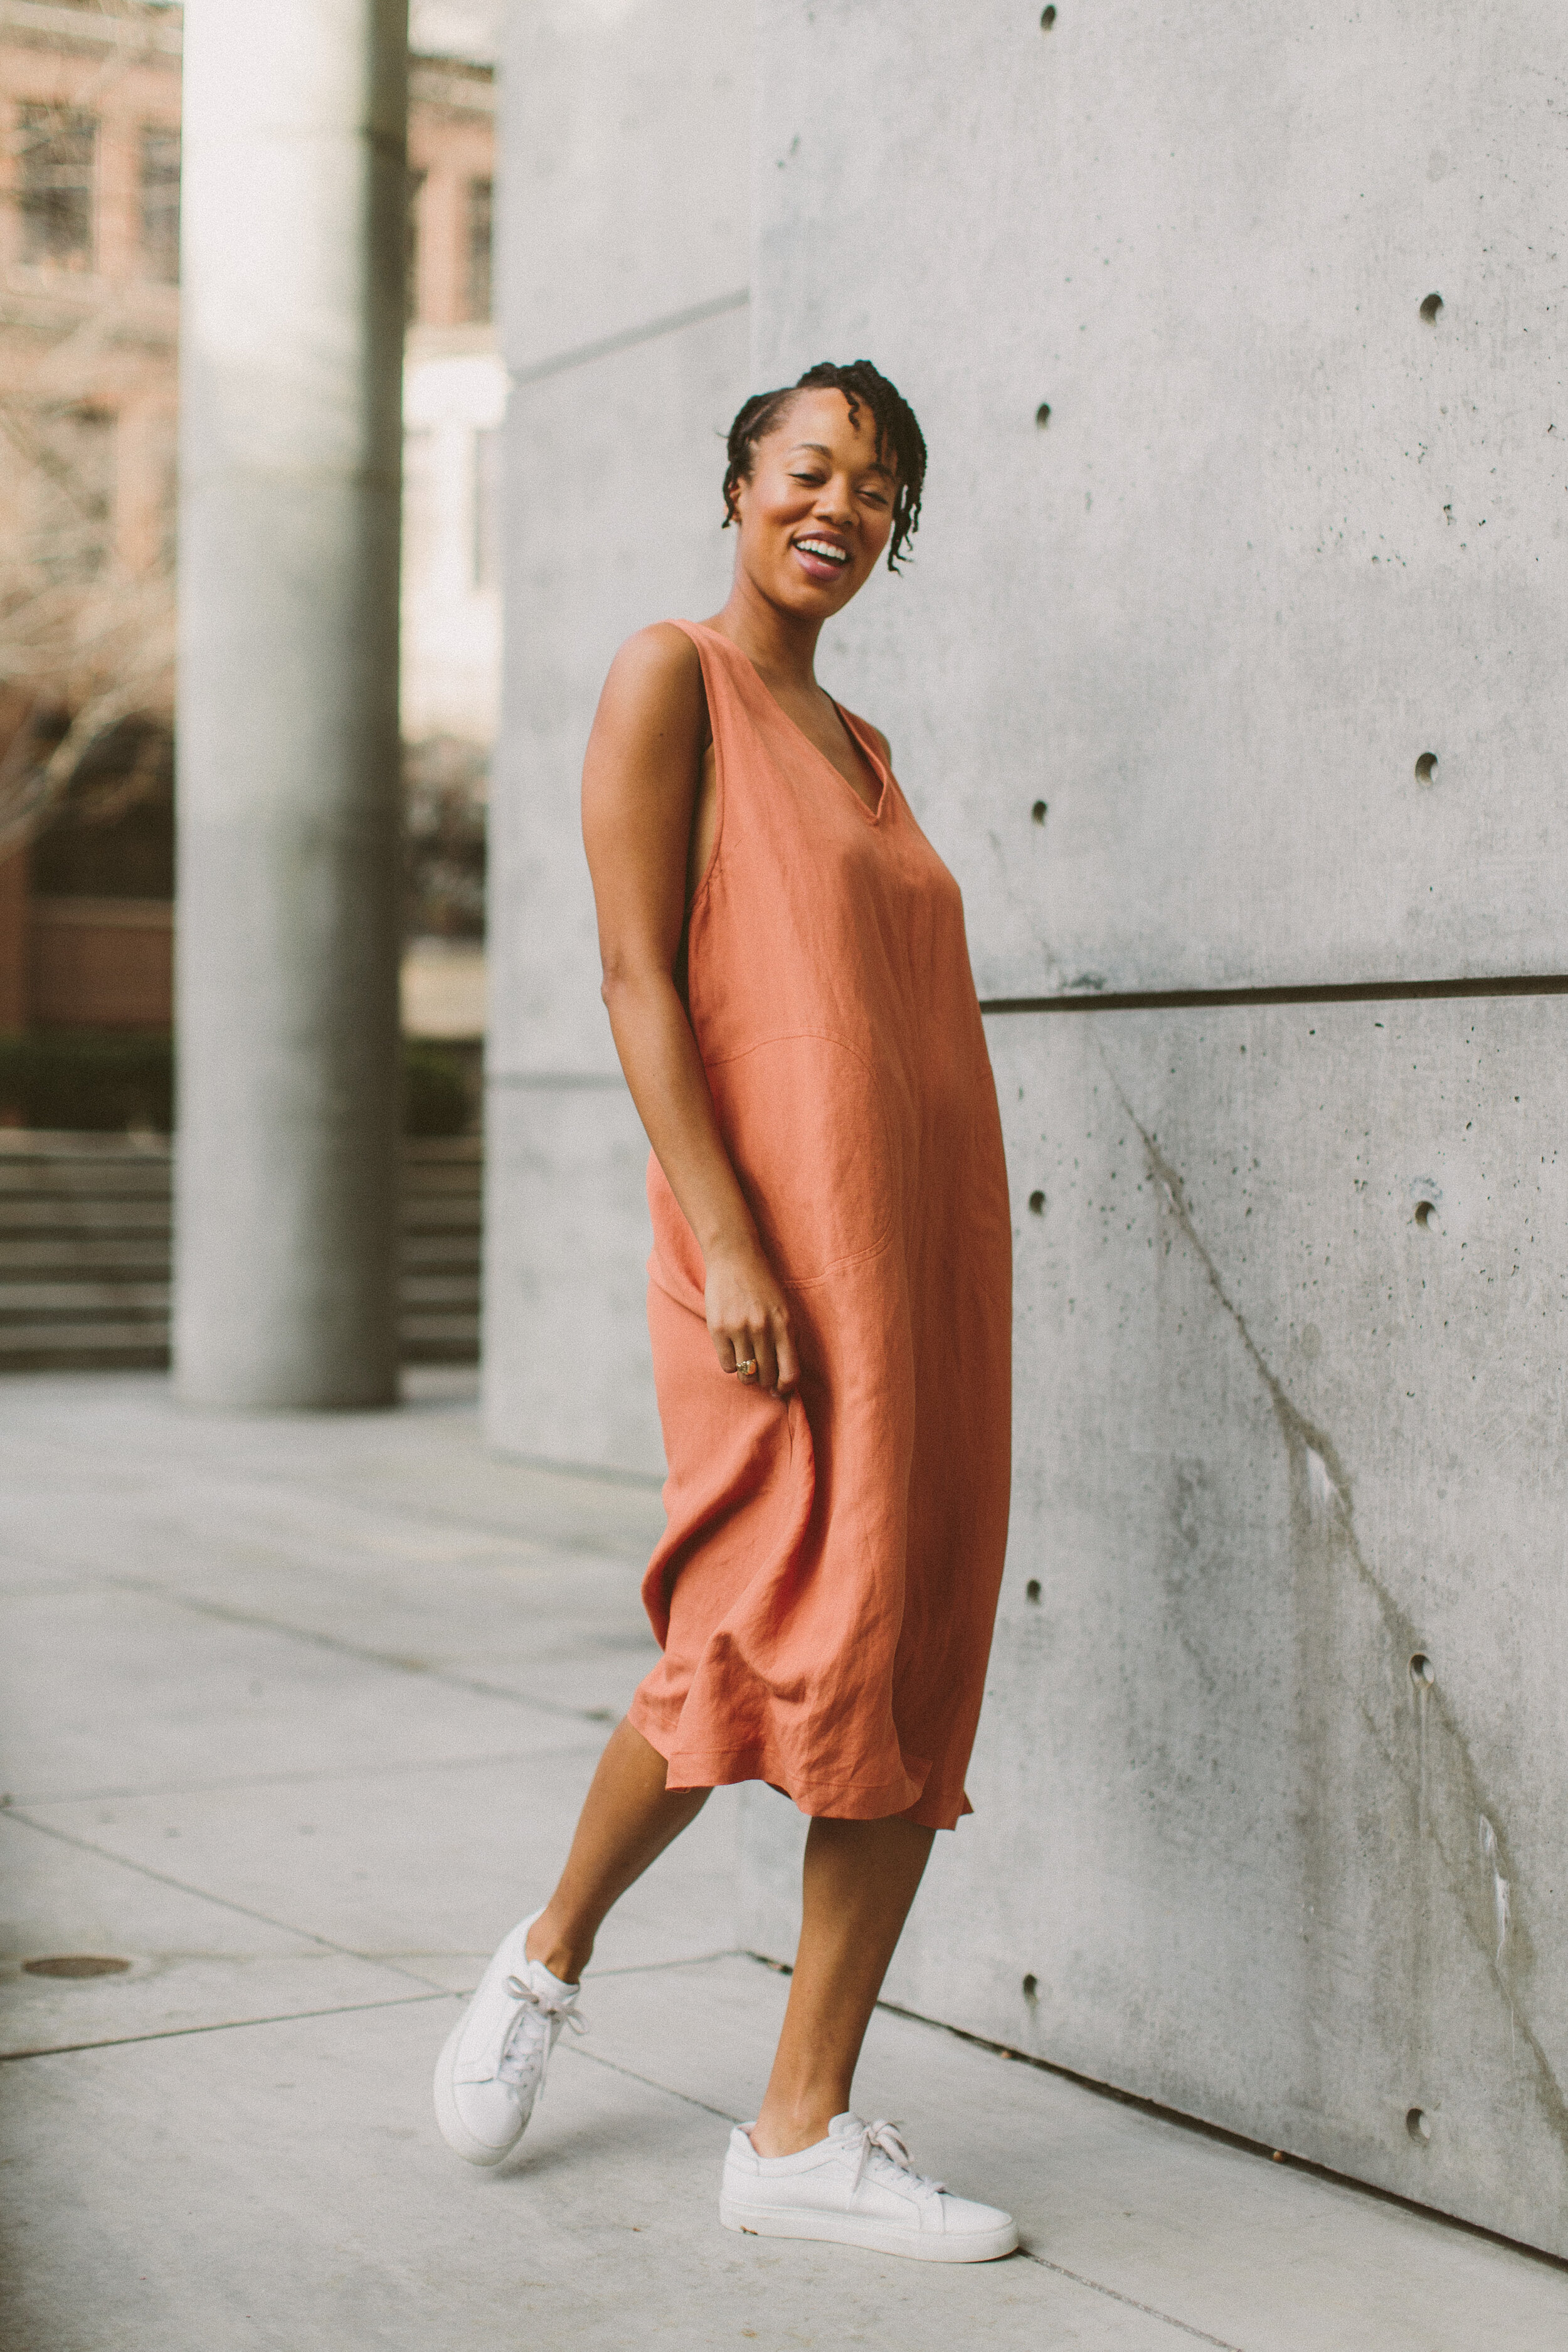  - Lauren Ash is a visionary, spiritual teacher, engaging speaker and writer, and founder and CEO of the culture-shifting lifestyle brand synonymous with black women’s wellbeing—Black Girl In Om.